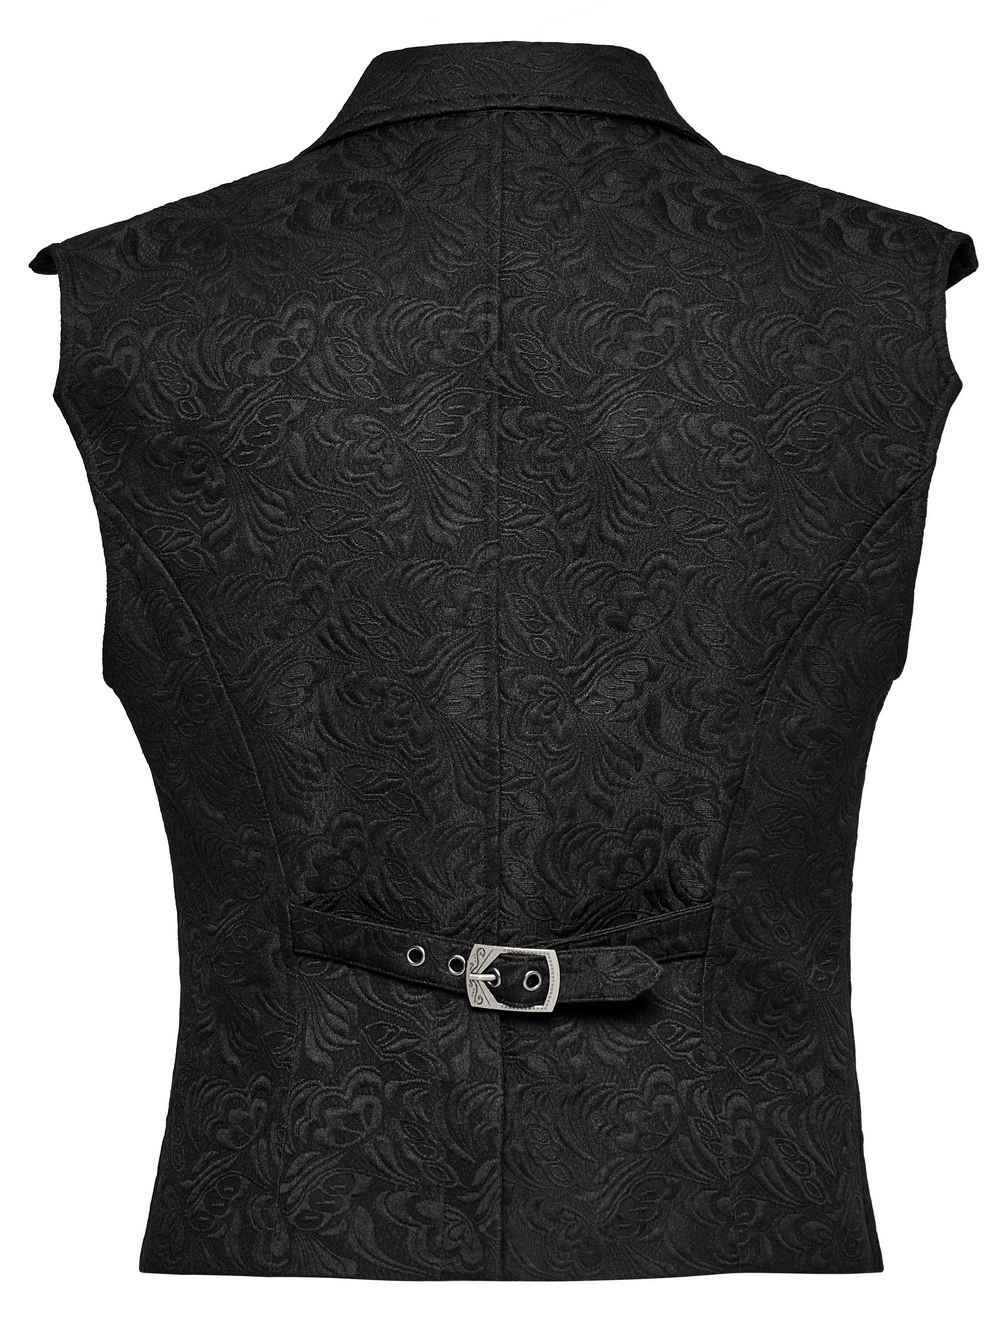 Gothic Jacquard Waistcoat with Gemstone Buttons